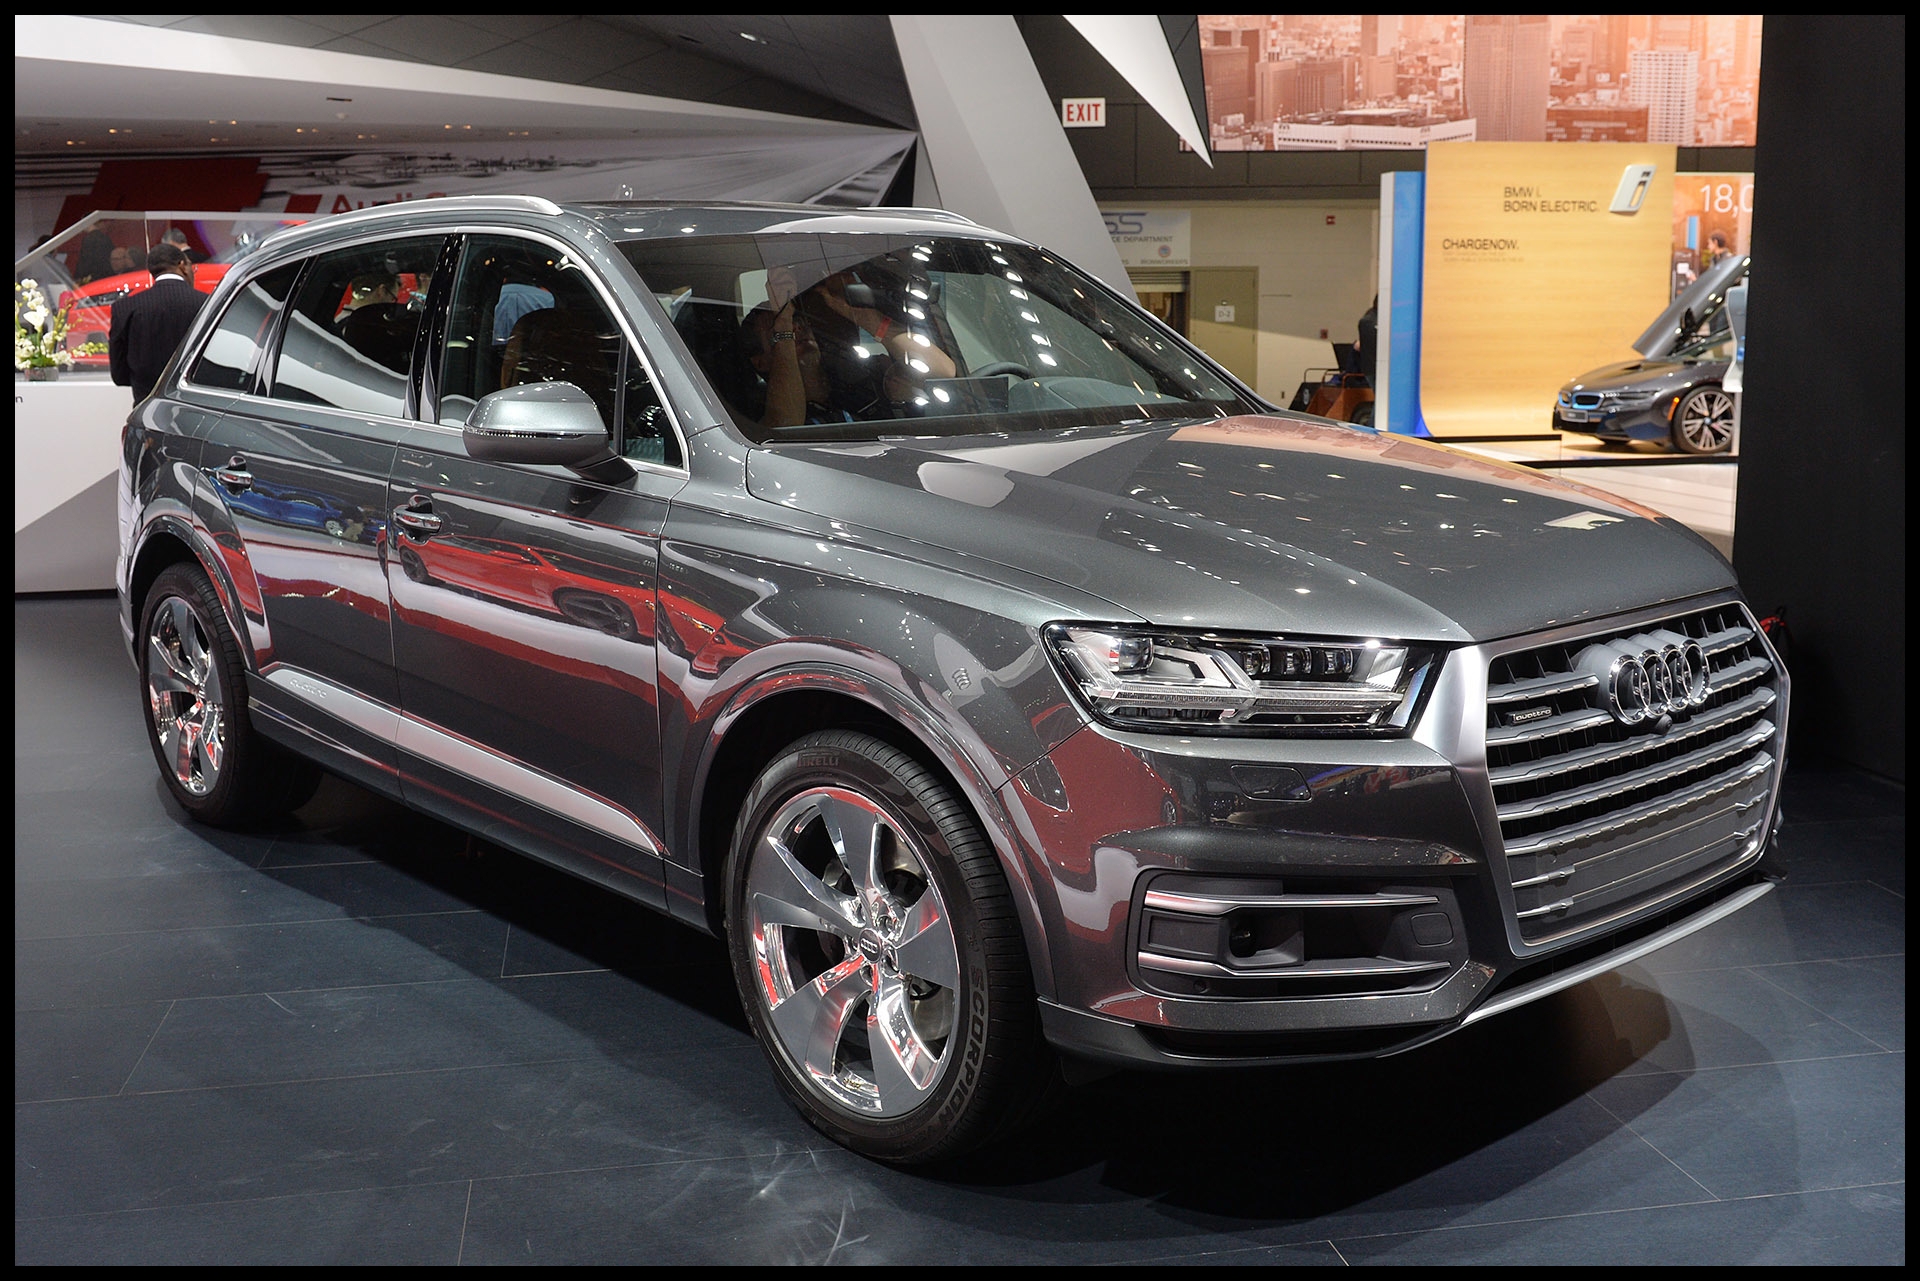 How Much is An Audi Q7 New Audi Q7 2018 Prices In Pakistan and Reviews